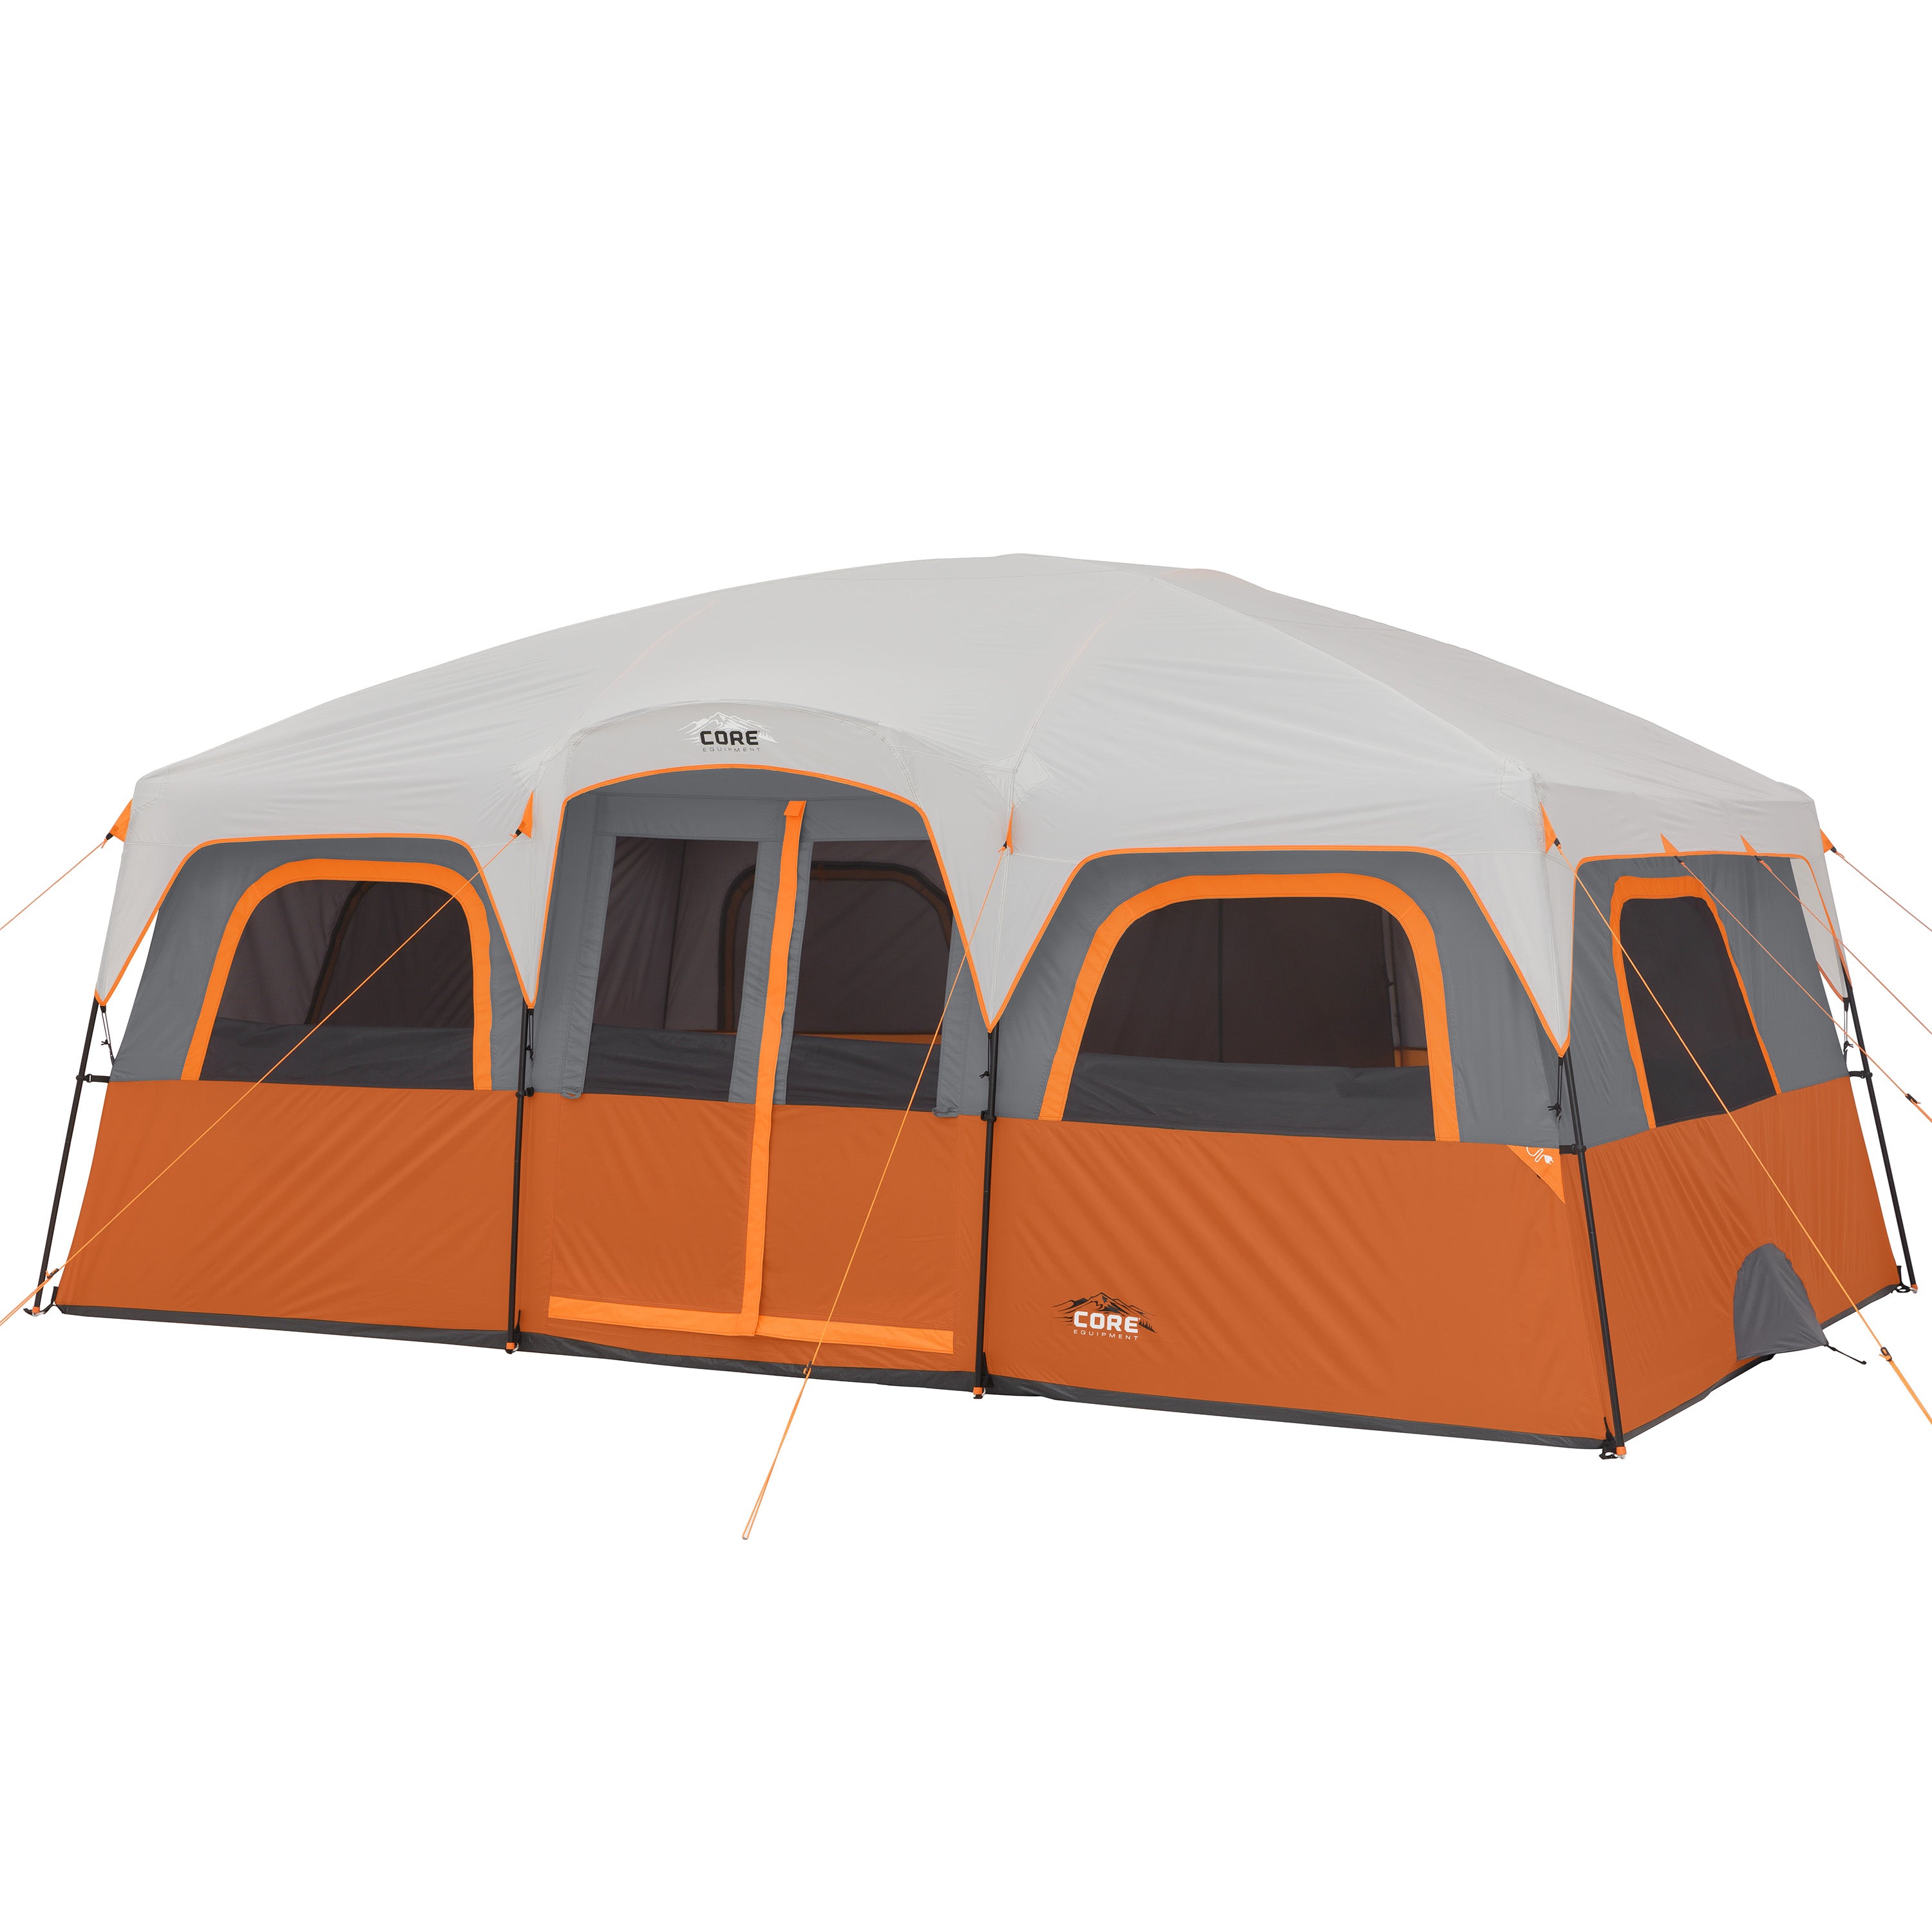 10 Person Straight Wall Cabin Tent with Full Rainfly 14' x 10